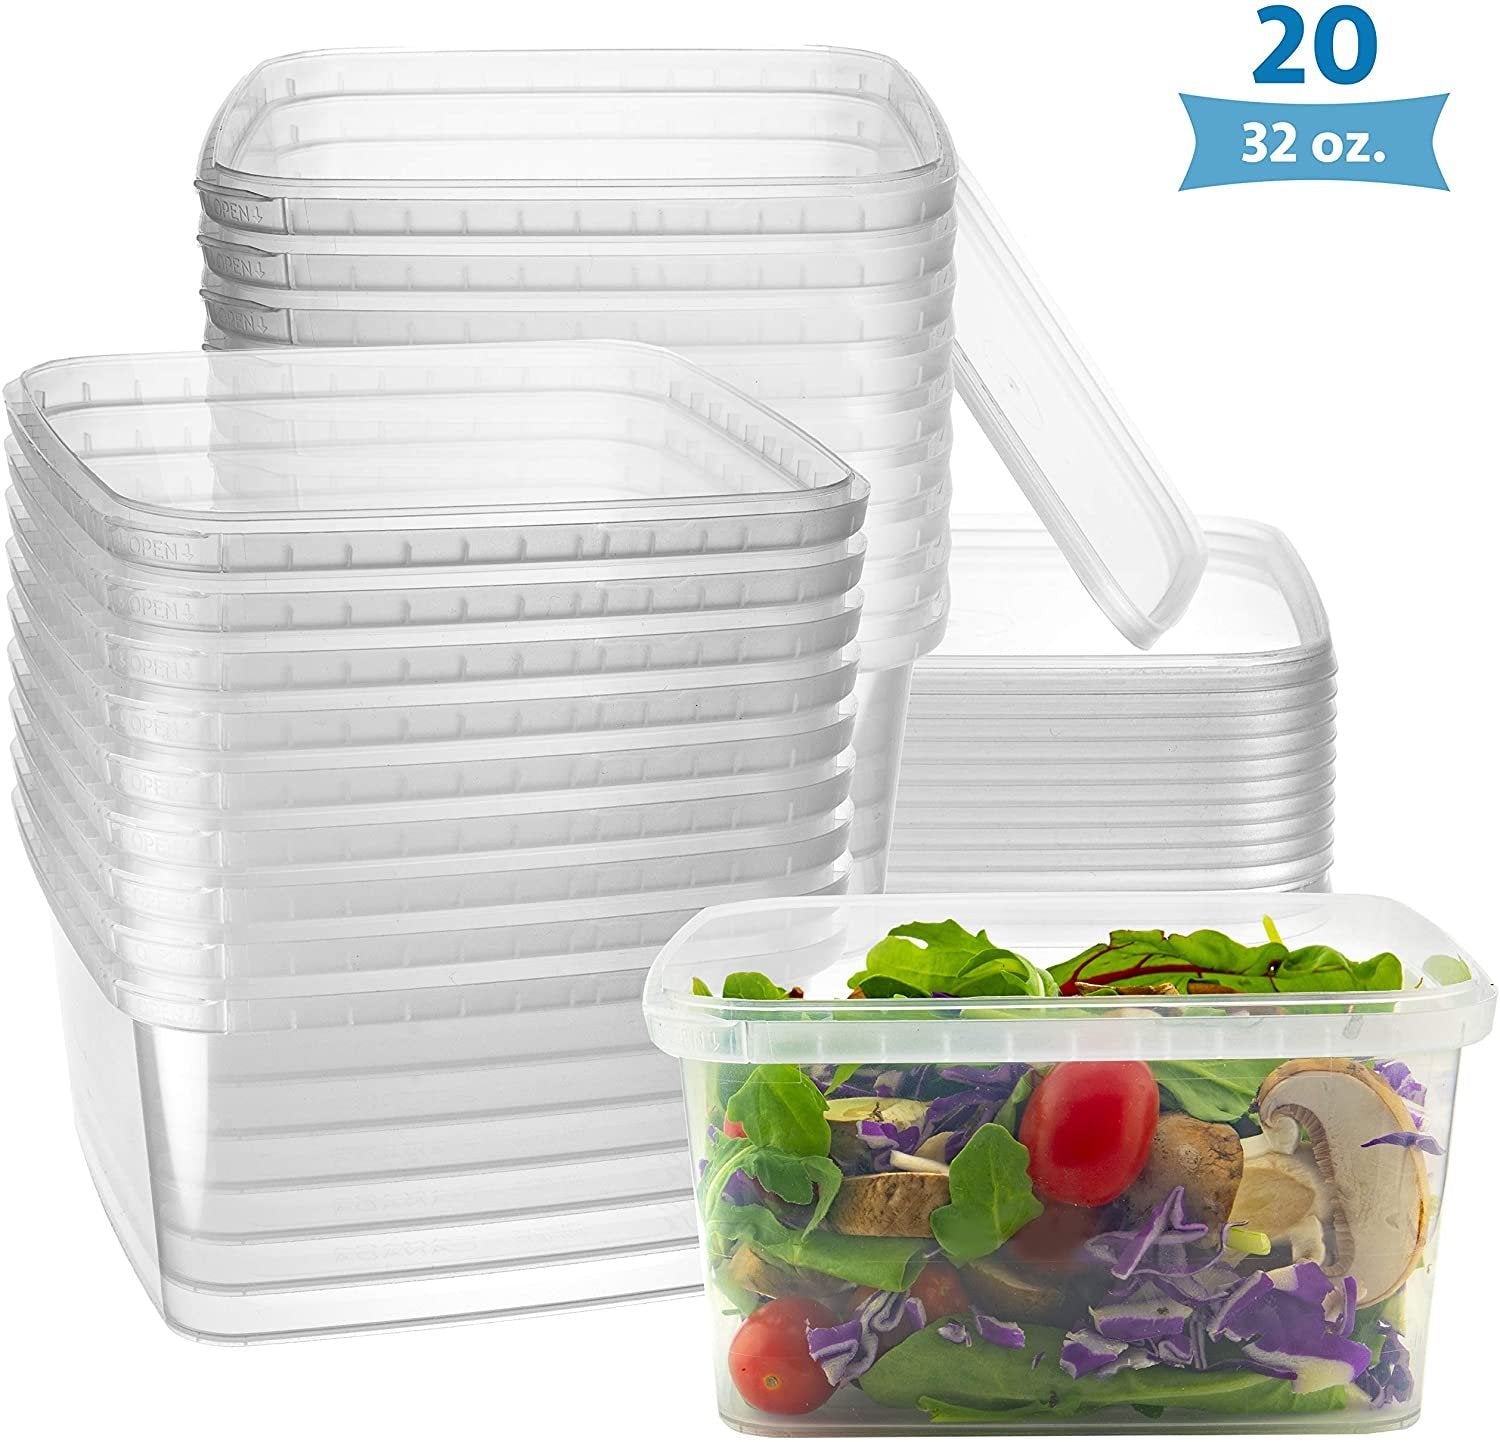  32 oz Deli Containers with Lids 240 Bulk Pack – Plastic Quart  Container with Lid Disposable 32oz freezer Soup & Food Storage Tall large  Container 32 Ounce - Cups with Cover